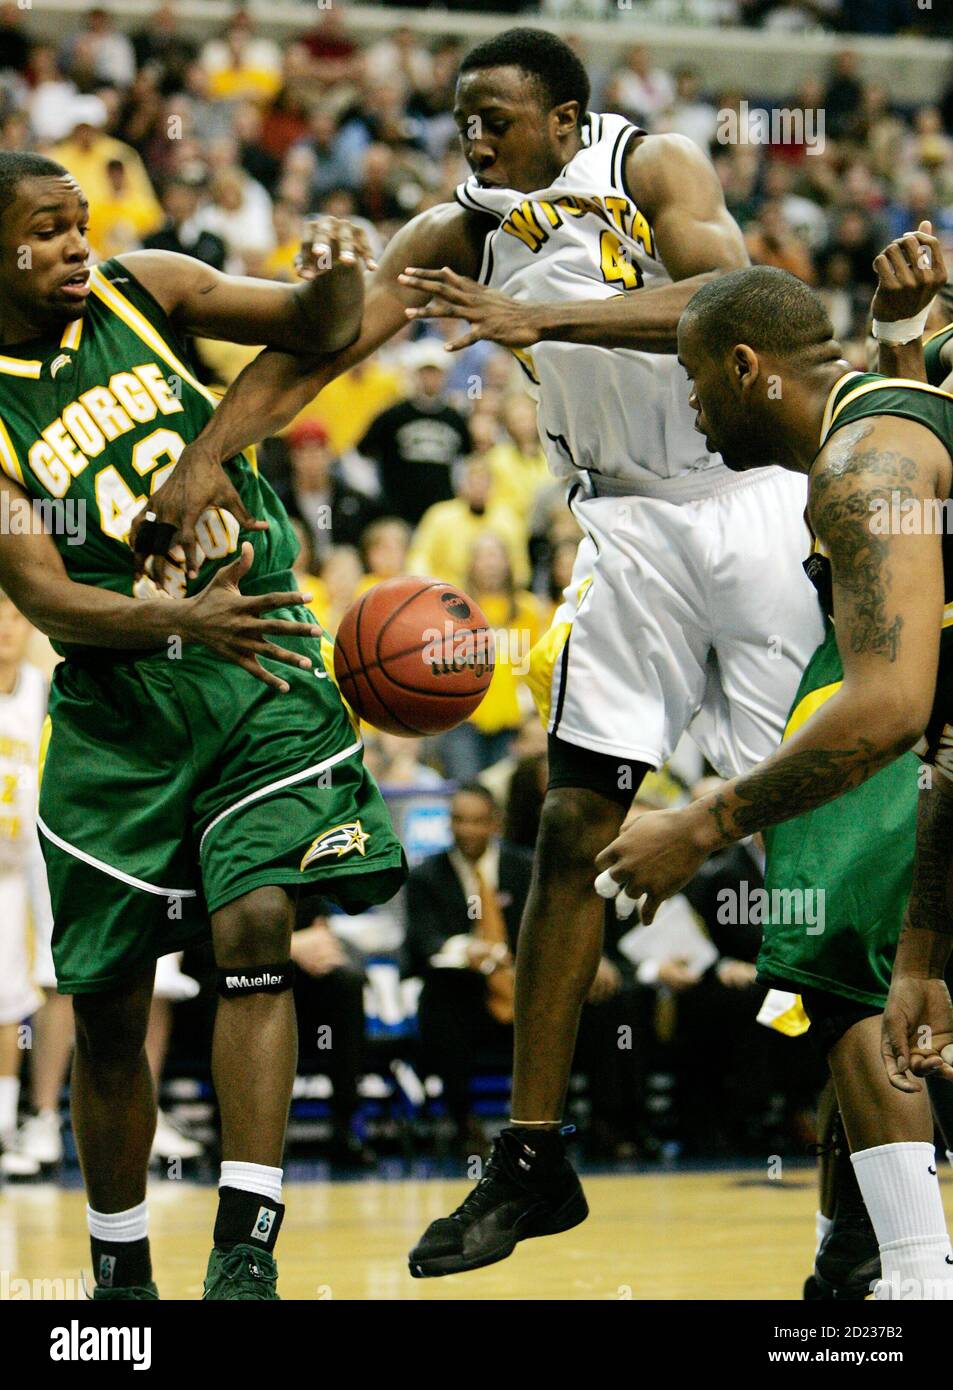 Wichita State's Ryan Martin (C) loses the ball to George Mason's Folarin  Campbell (L) and Jai Lewis (R) during their men's NCAA basketball regional  semifinal in Washington March 24, 2006. George Mason